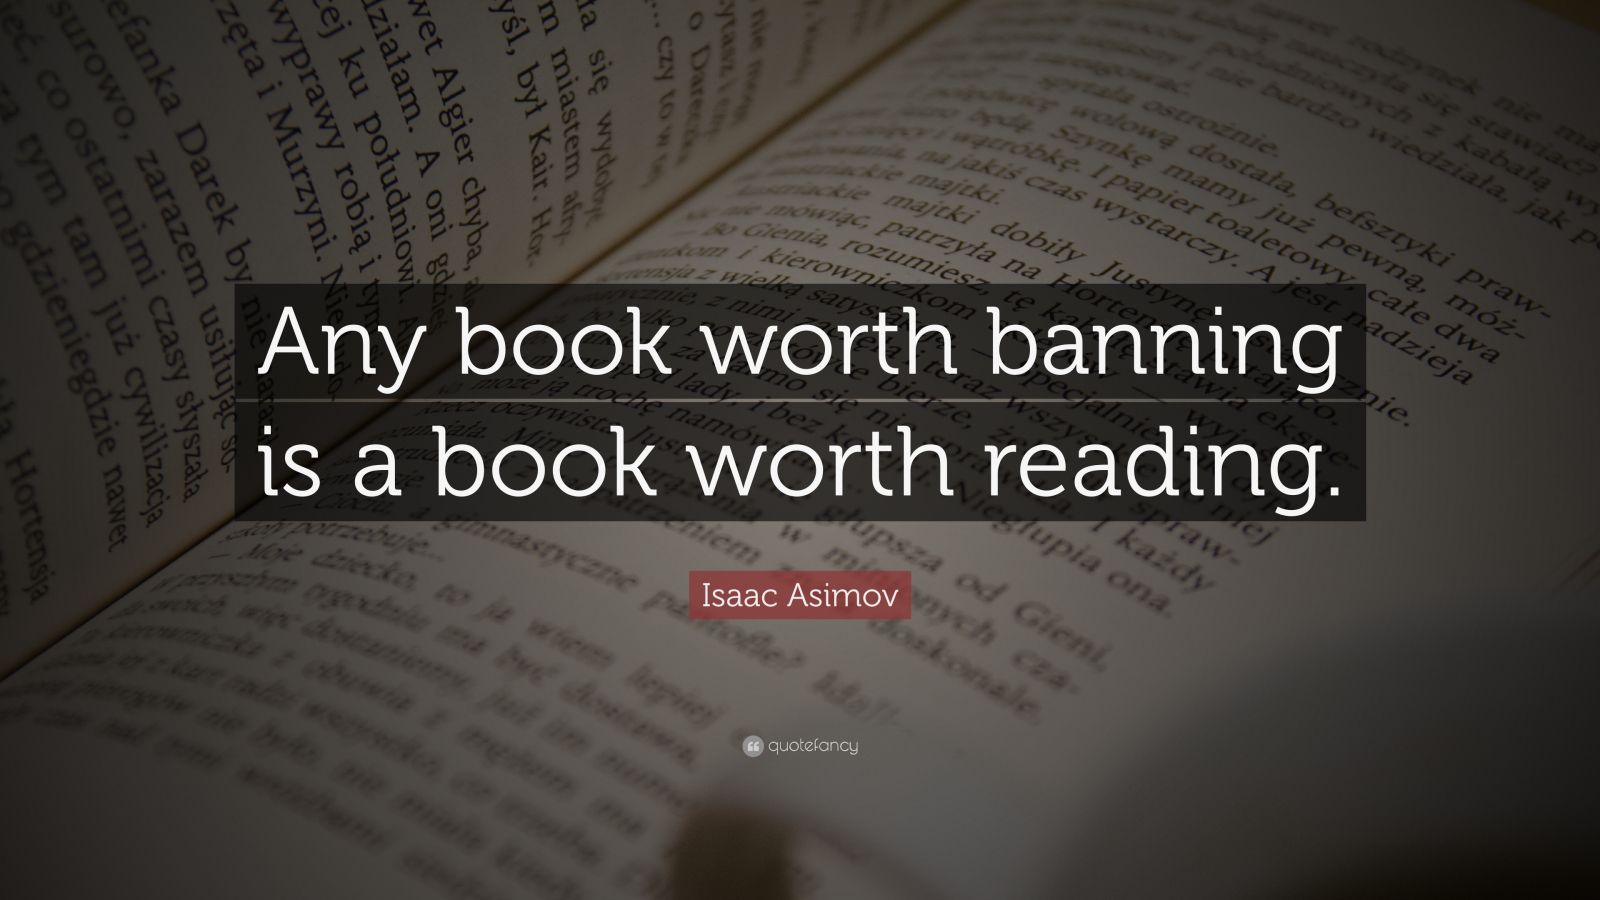 Isaac Asimov Quote: “Any book worth banning is a book worth reading